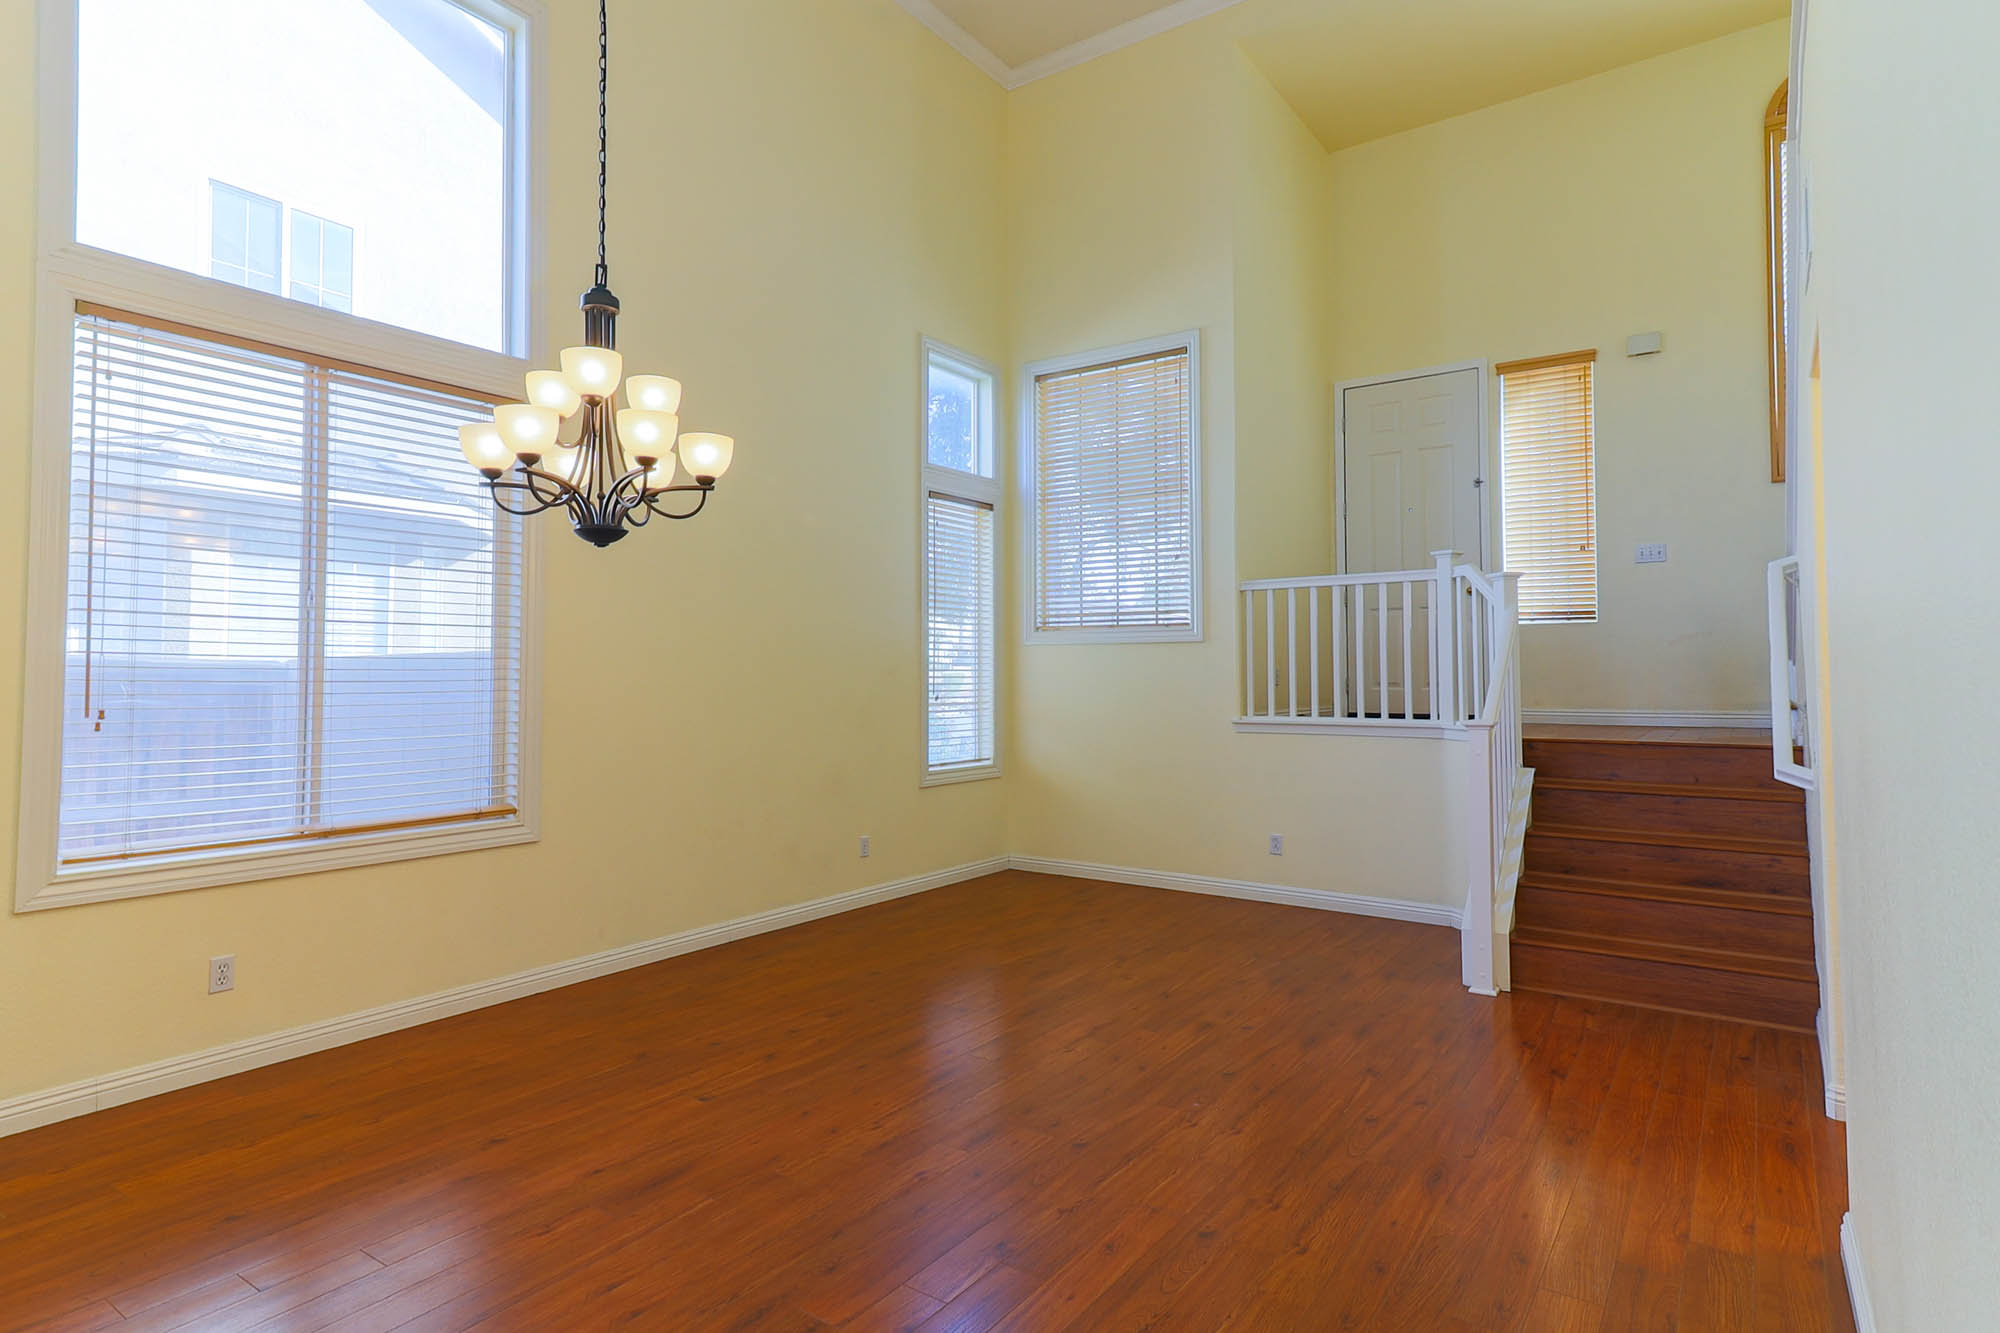 Windflower formal living room and entry photo